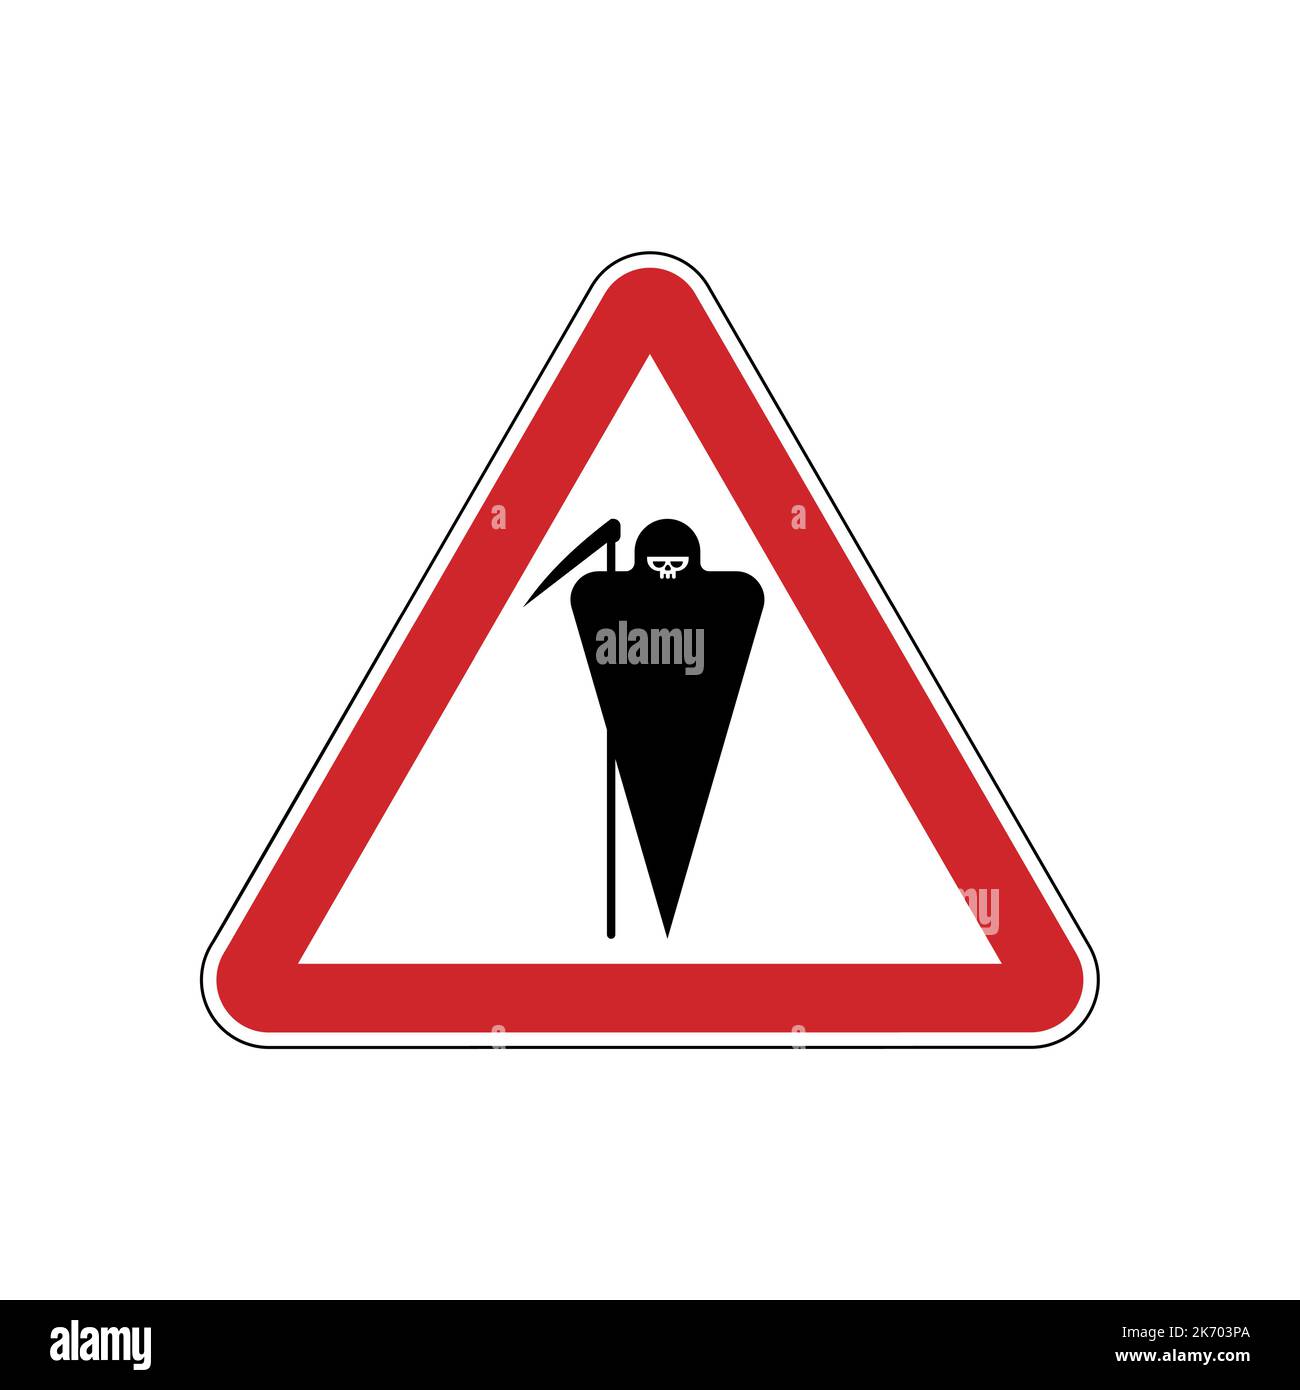 Attention Grim Reaper. Caution Death. Red Danger road sign. Stock Vector